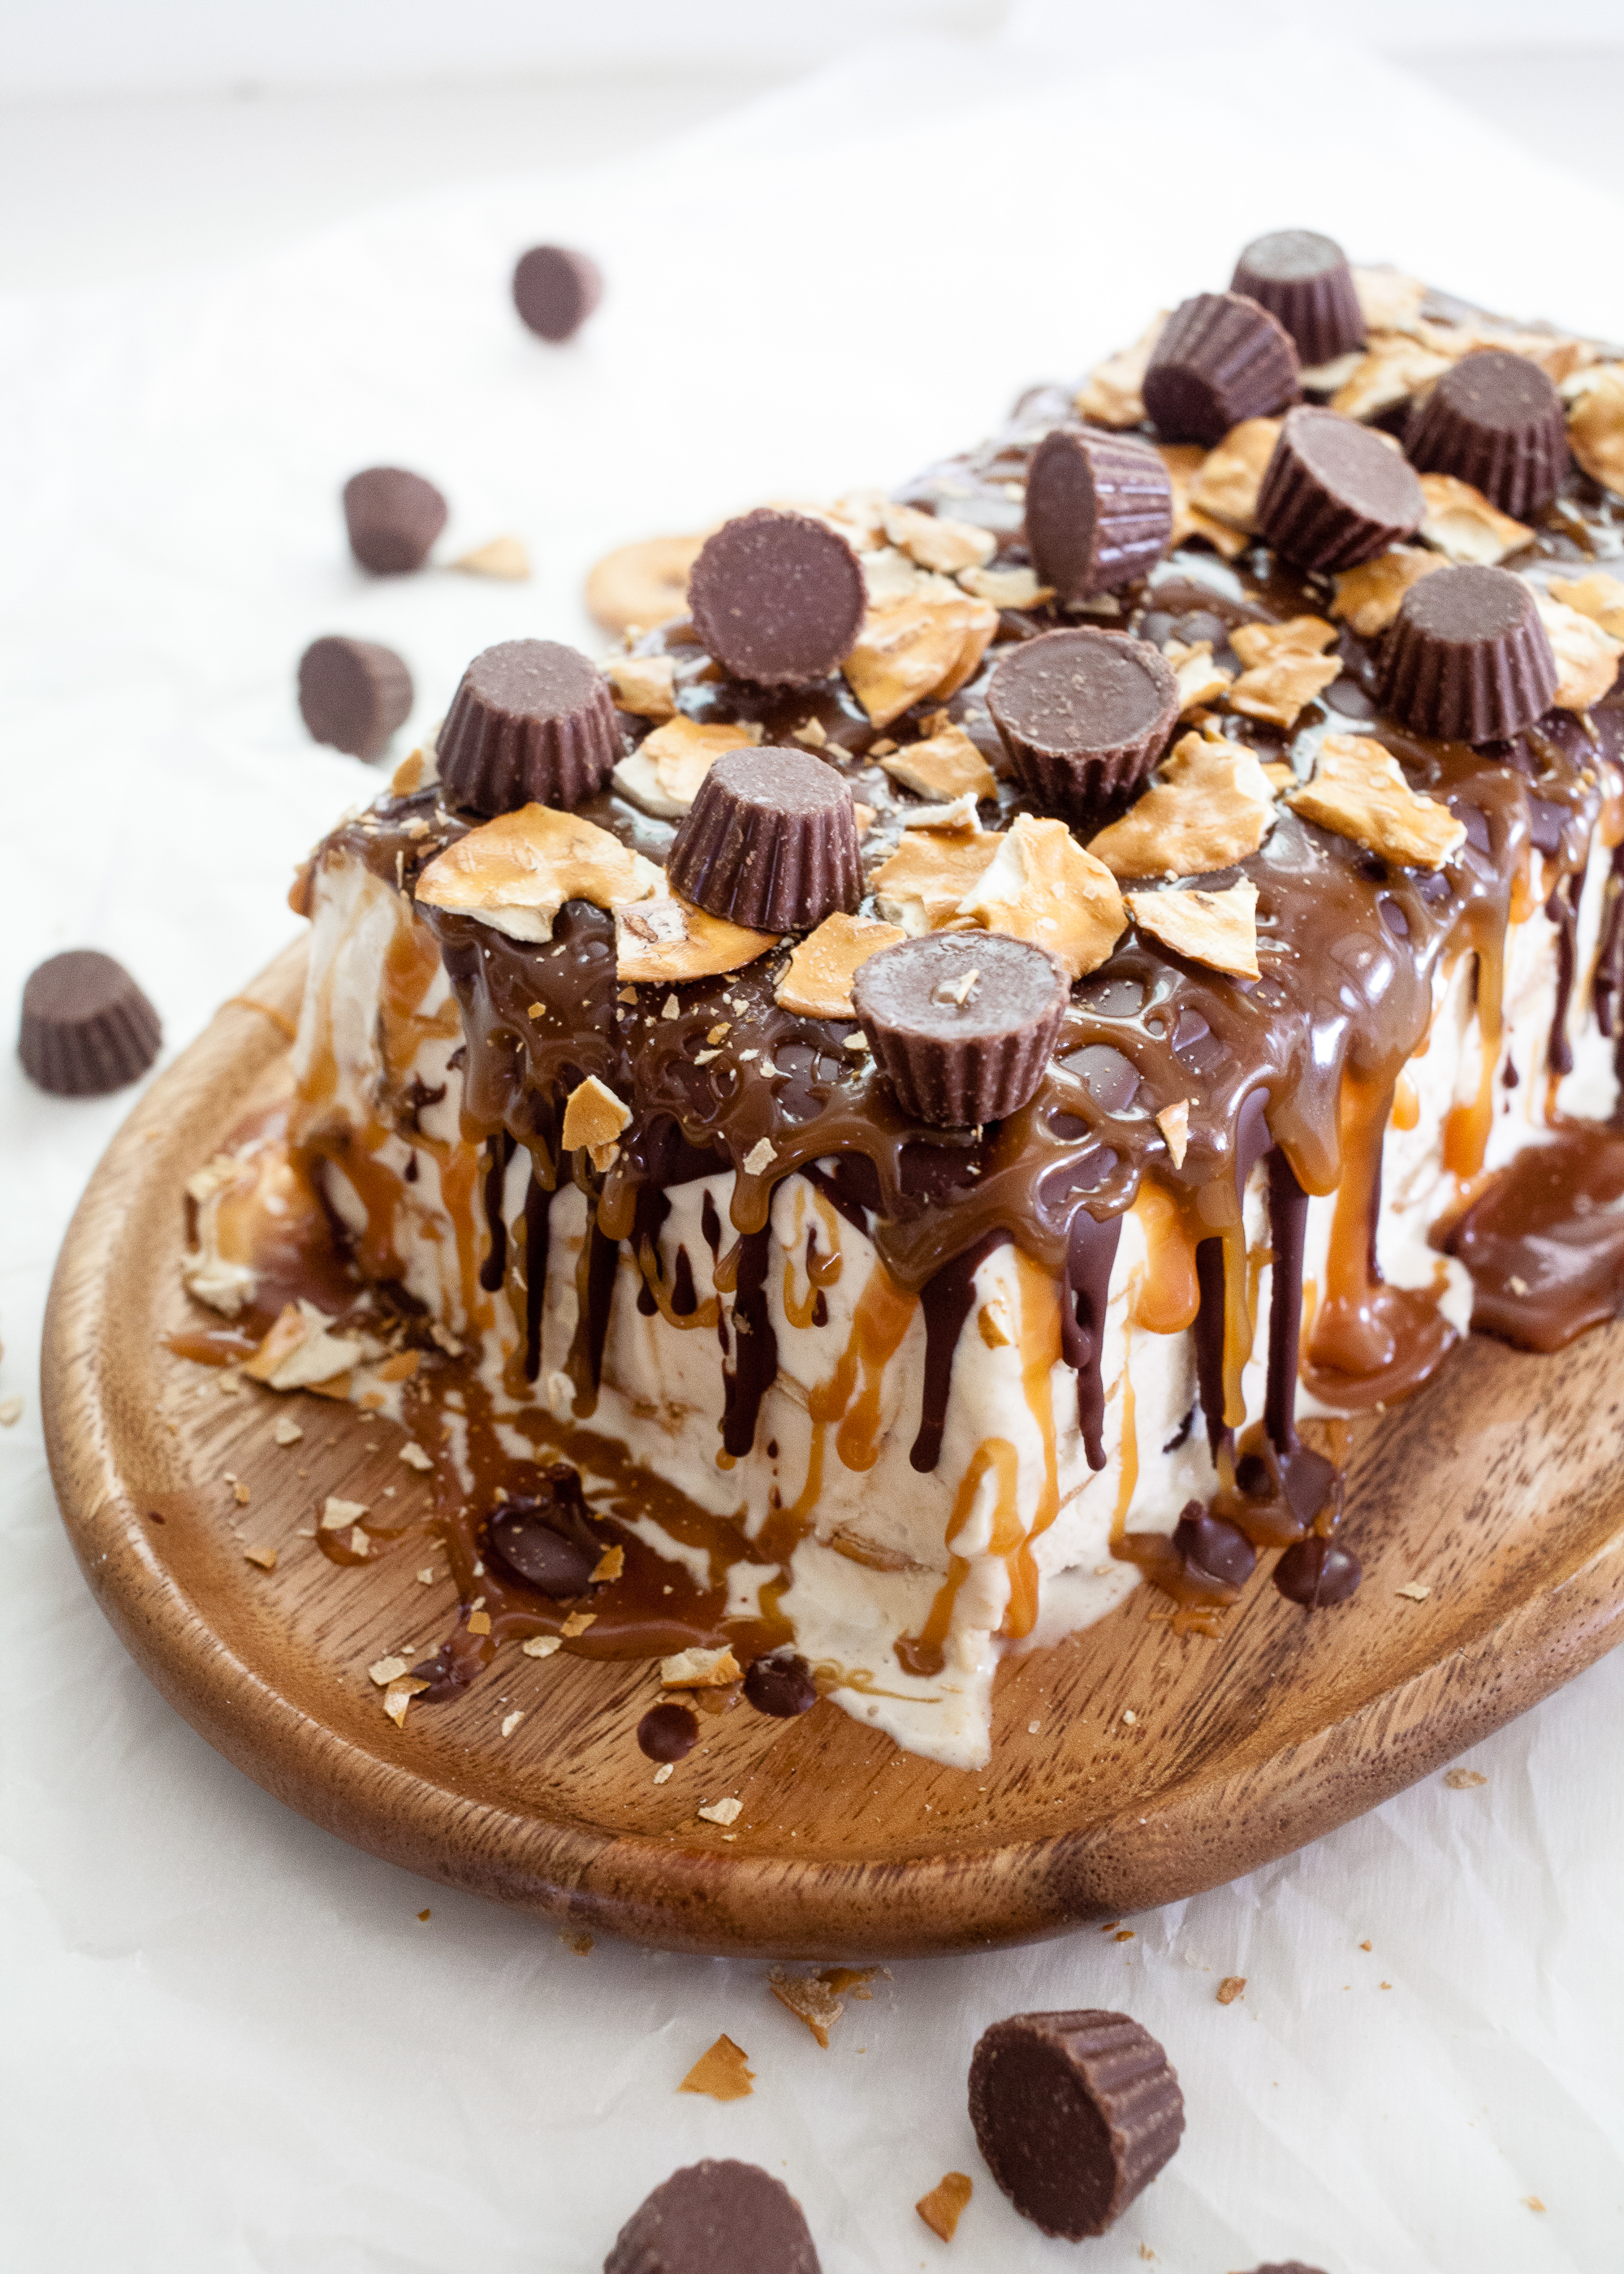 Peanut Butter and Pretzel Icebox Cake | The Pioneer Woman